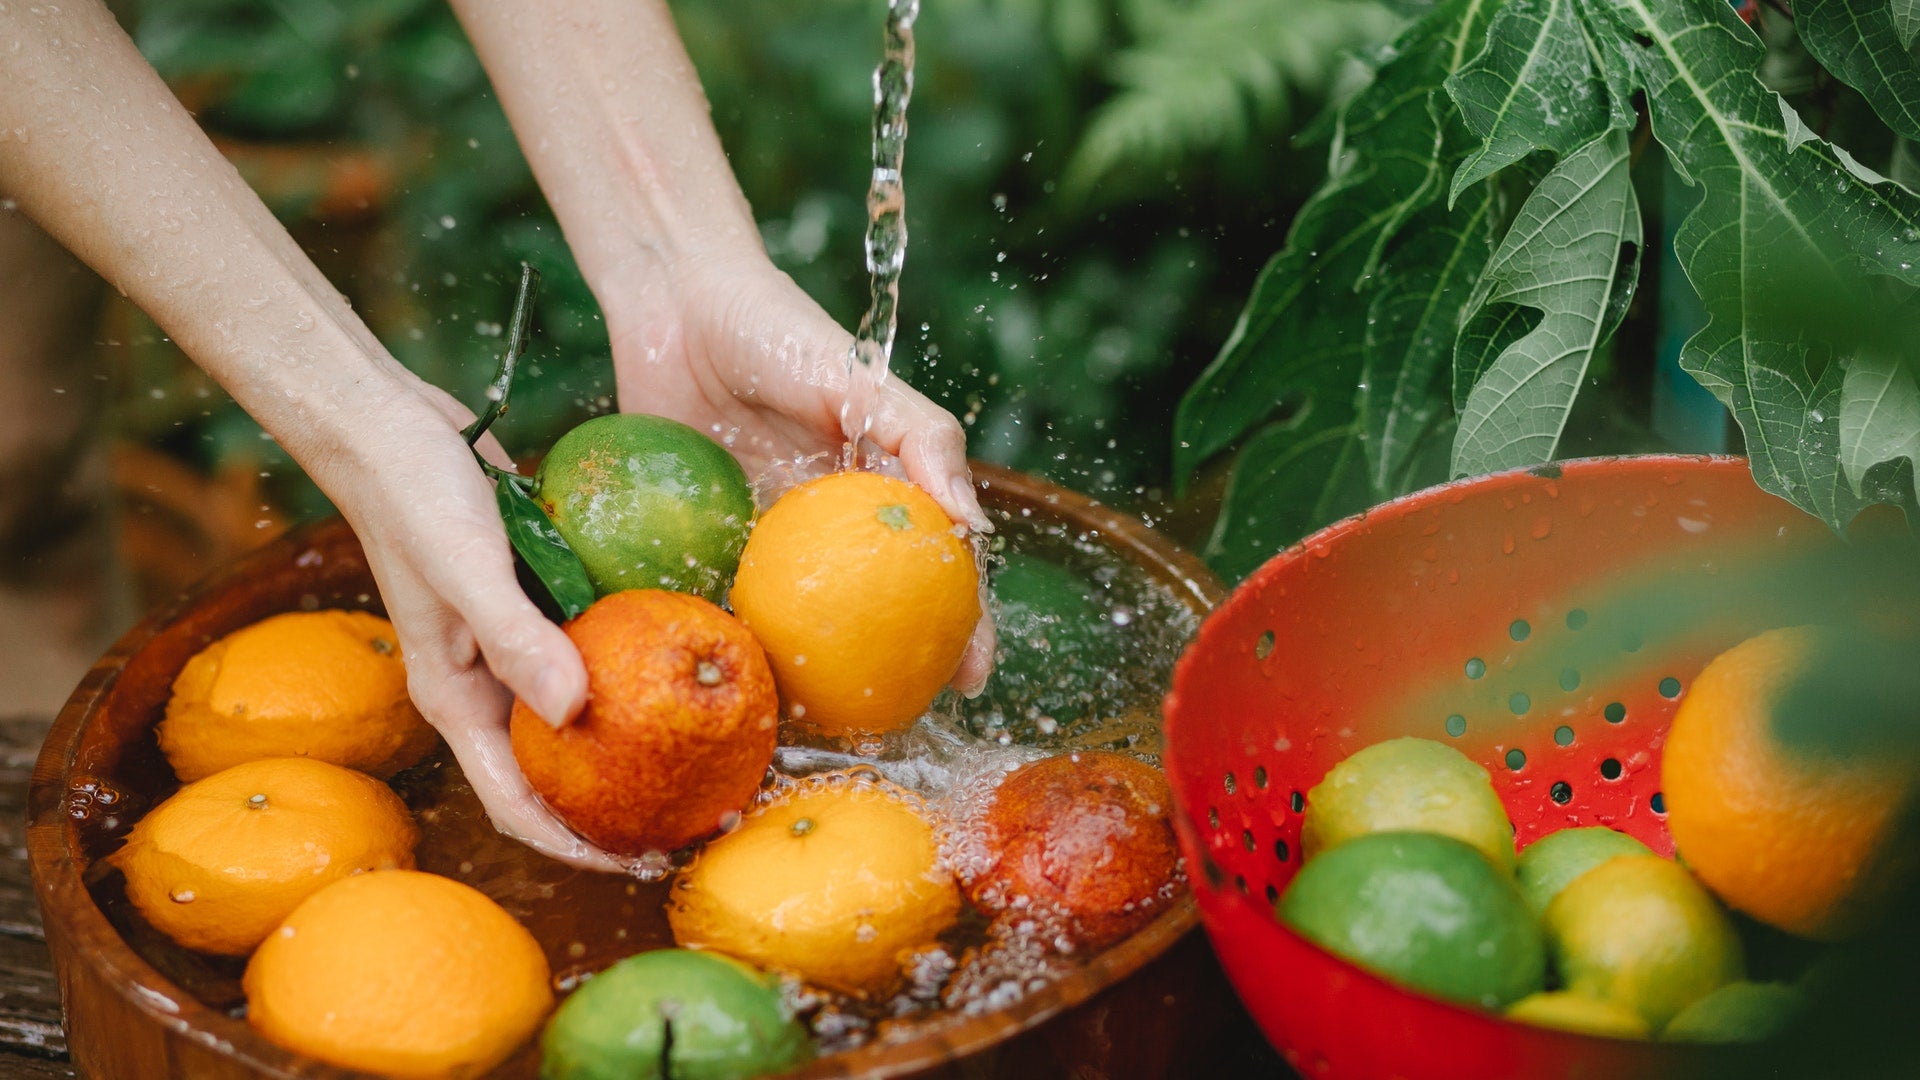 How to Wash Fruits & Vegetables